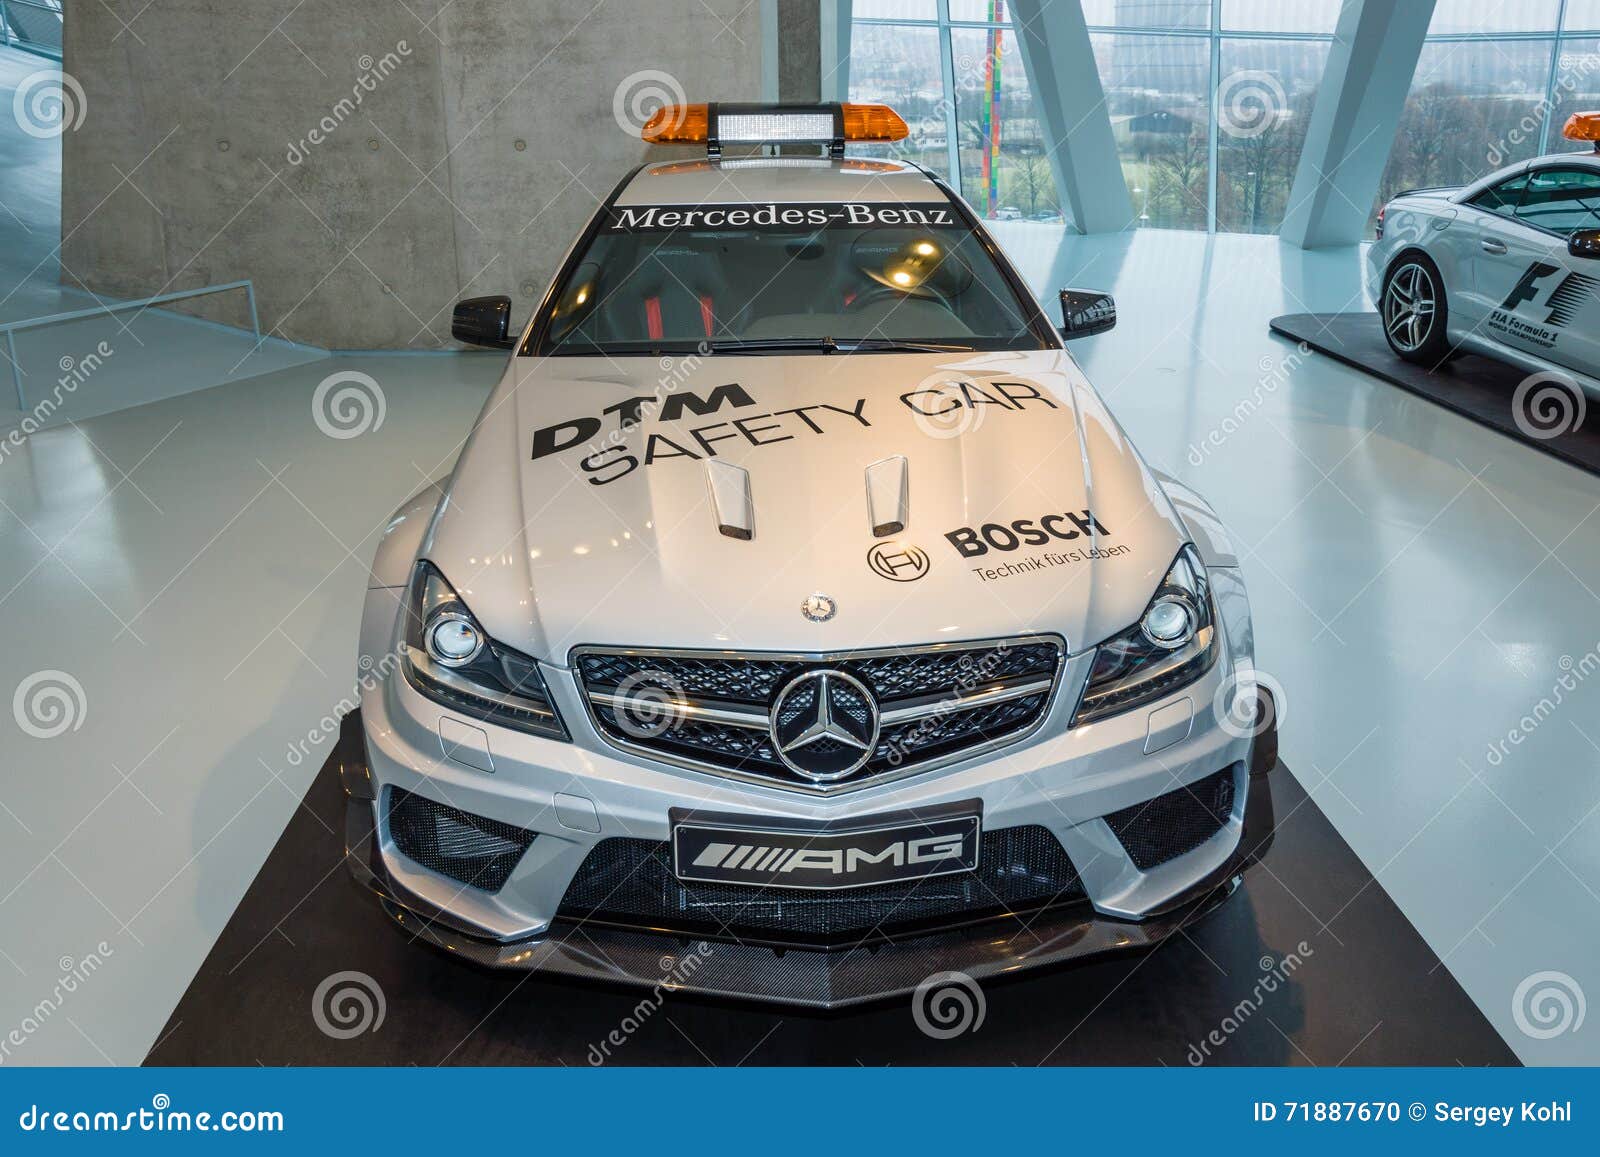 Official Dtm Safery Car Mercedes Benz C63 Amg Coupe 12 Editorial Image Image Of Safety Transportation